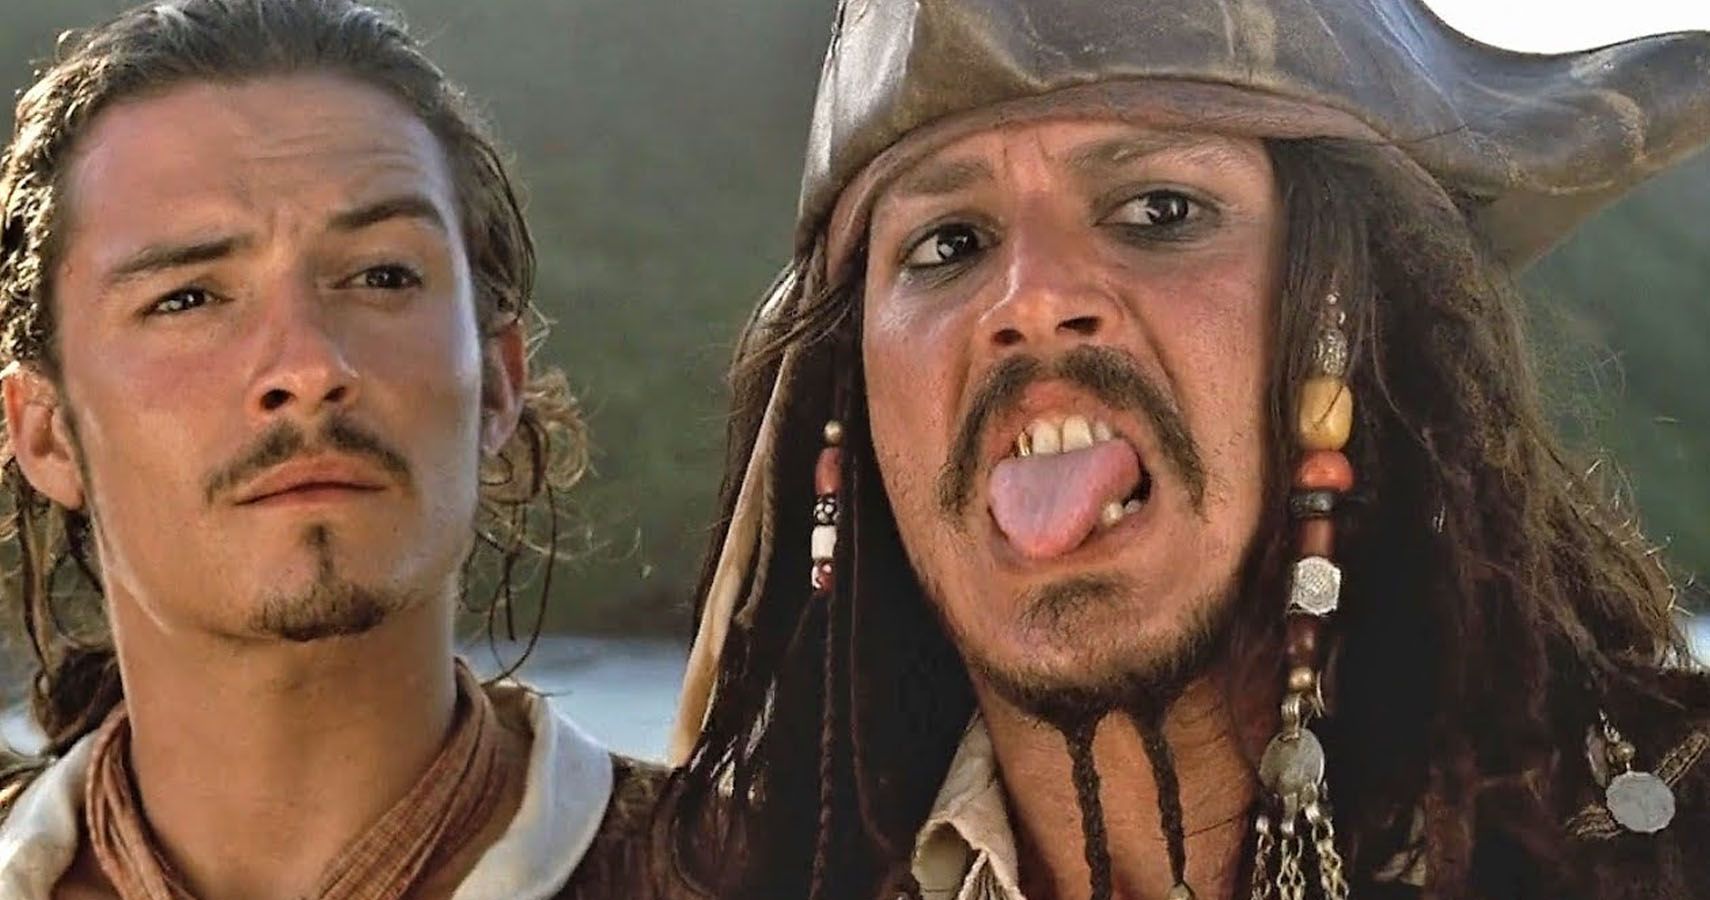 15 Details About The Making Of The First Pirates Of The Caribbean Film